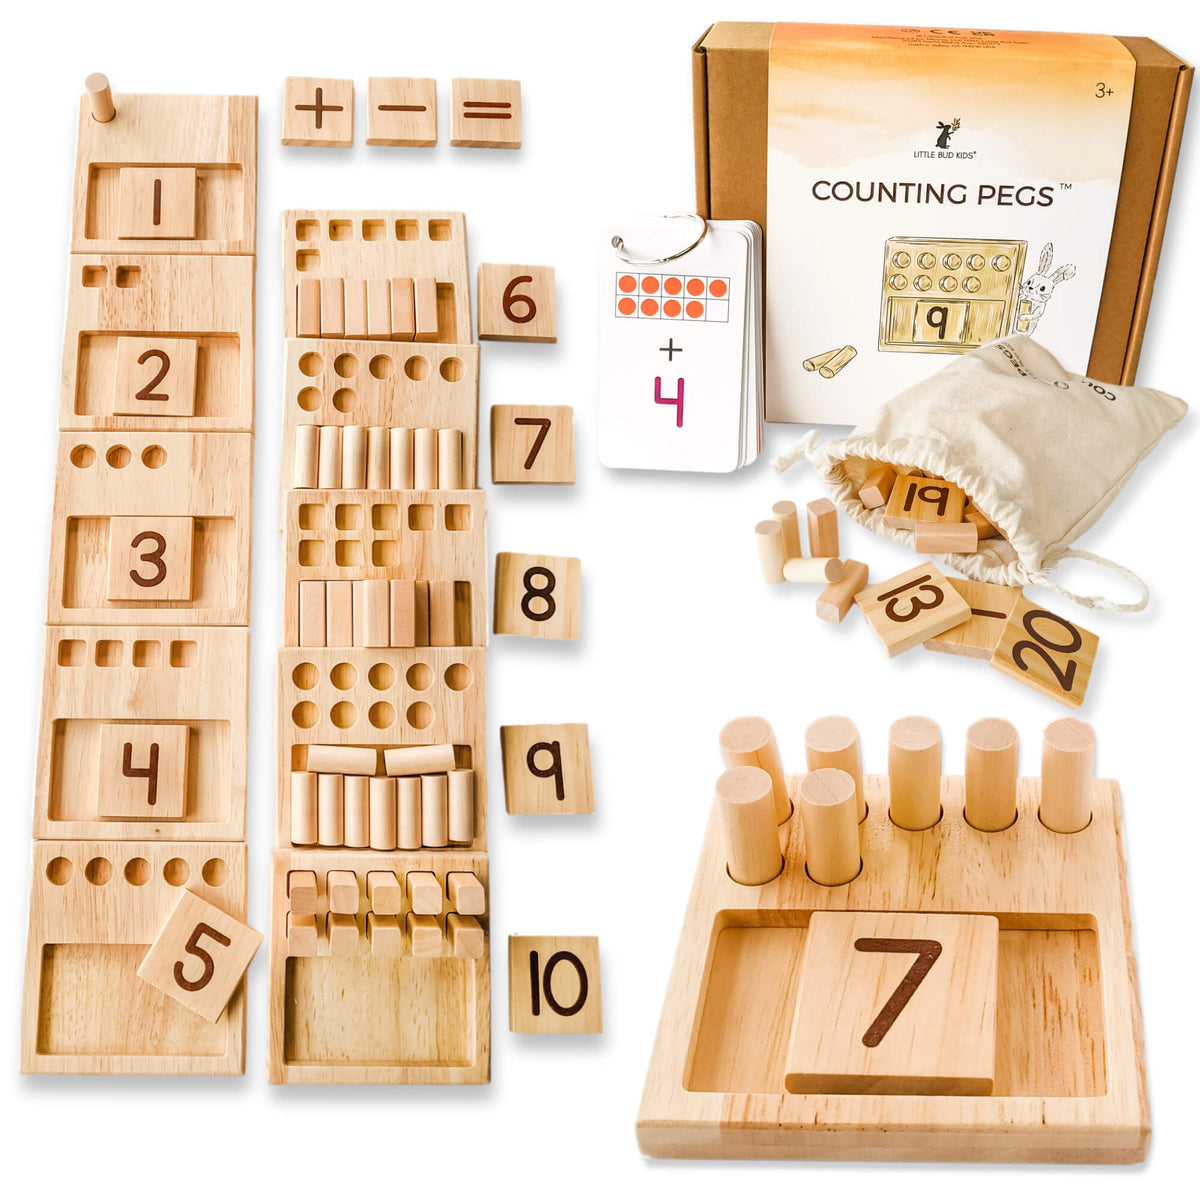 Little Bud Kids Counting Pegs Math Toy for Learning Counting, Ordering, Adding, & Subtracting. This Montessori-inspired ten frame math toy makes an excellent educational gift for 3-6 year olds!